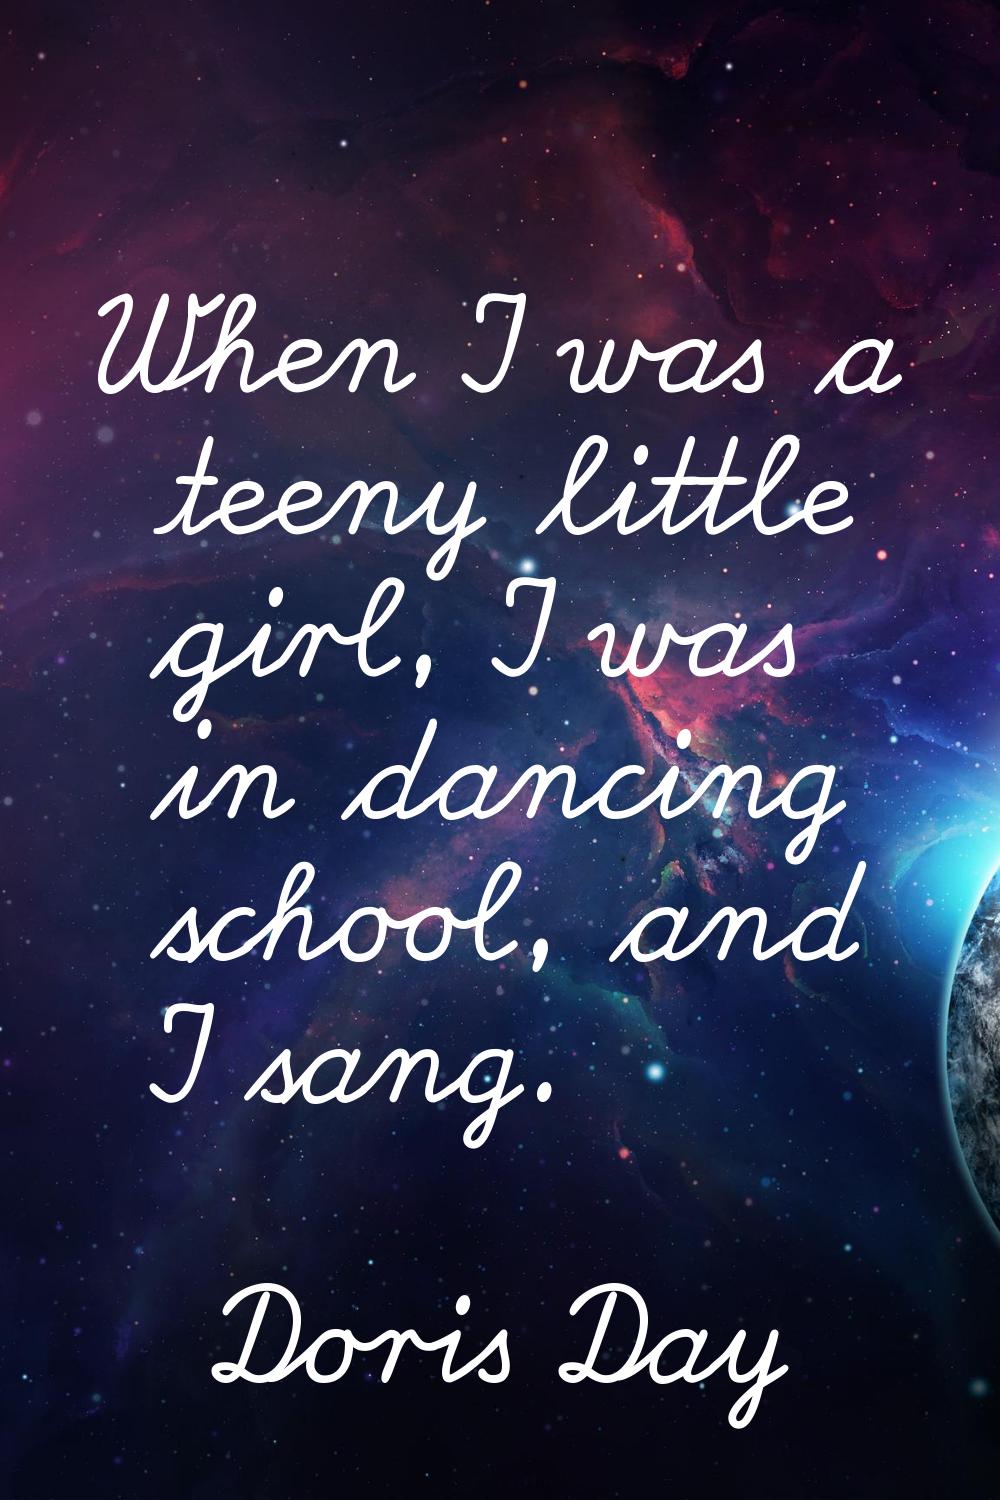 When I was a teeny little girl, I was in dancing school, and I sang.